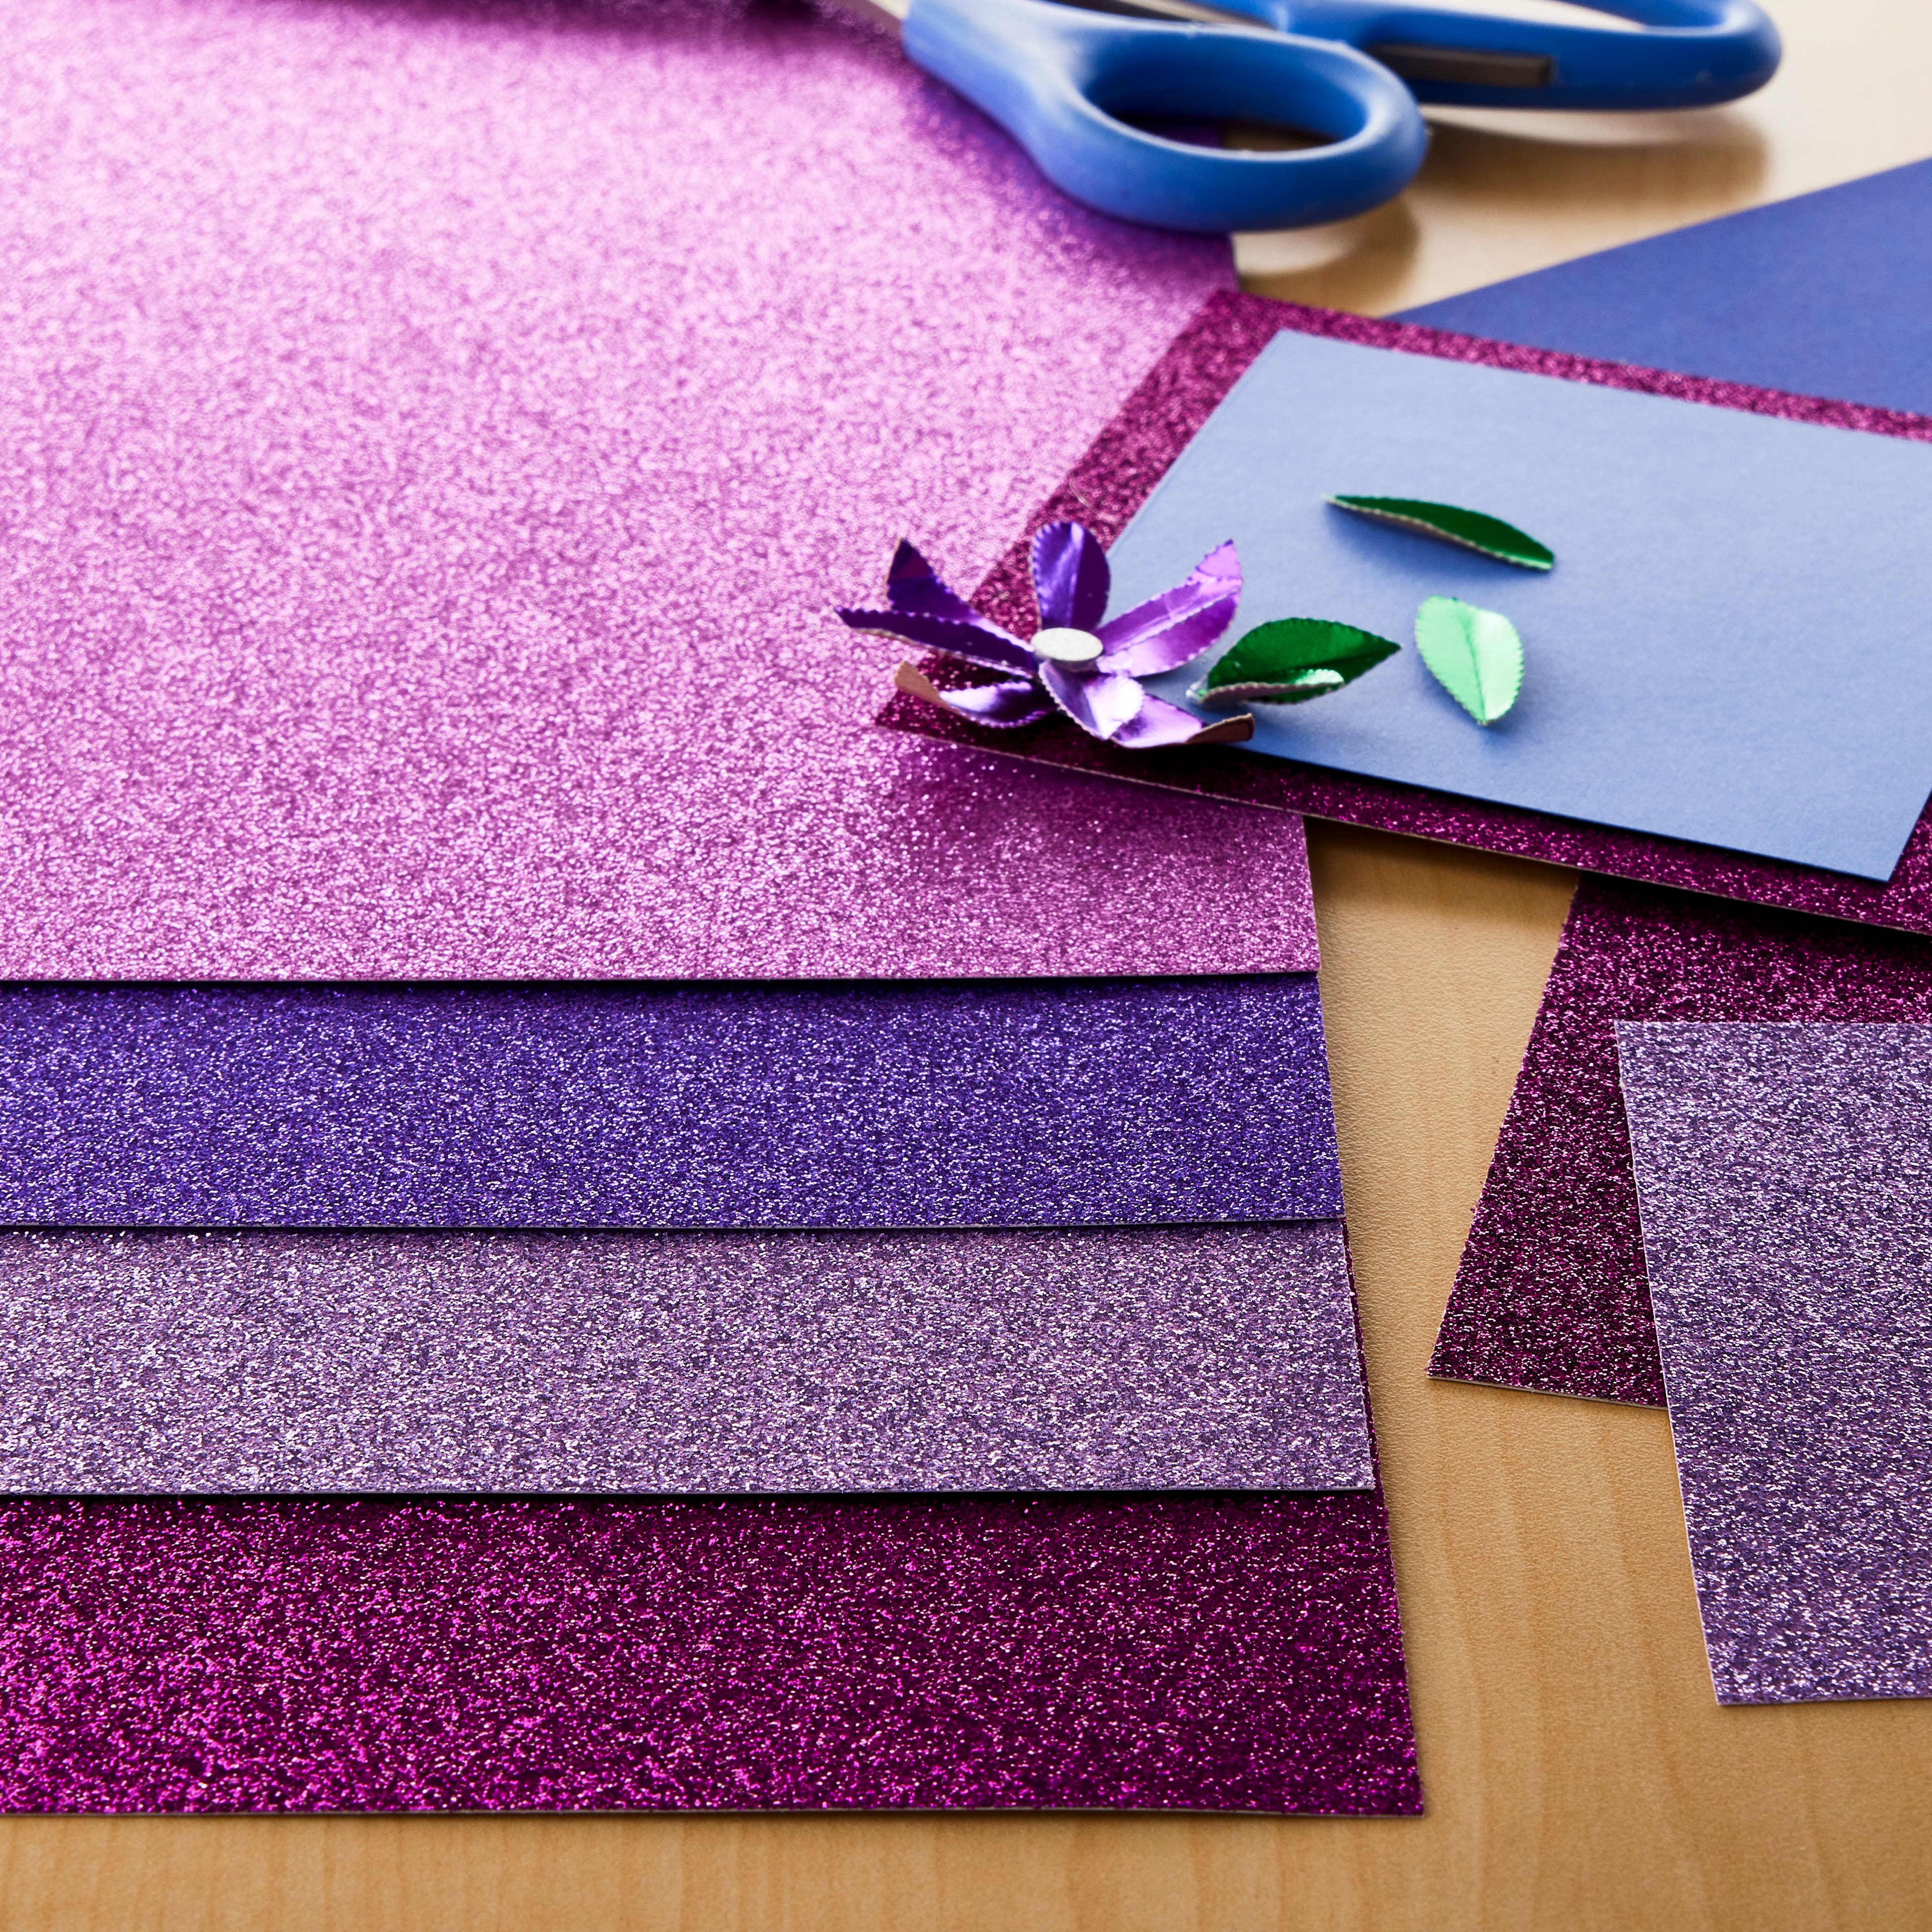 Sparkle Glitter Purple Passion 12x12 Cardstock Paper - 2 Sheets – Country  Croppers